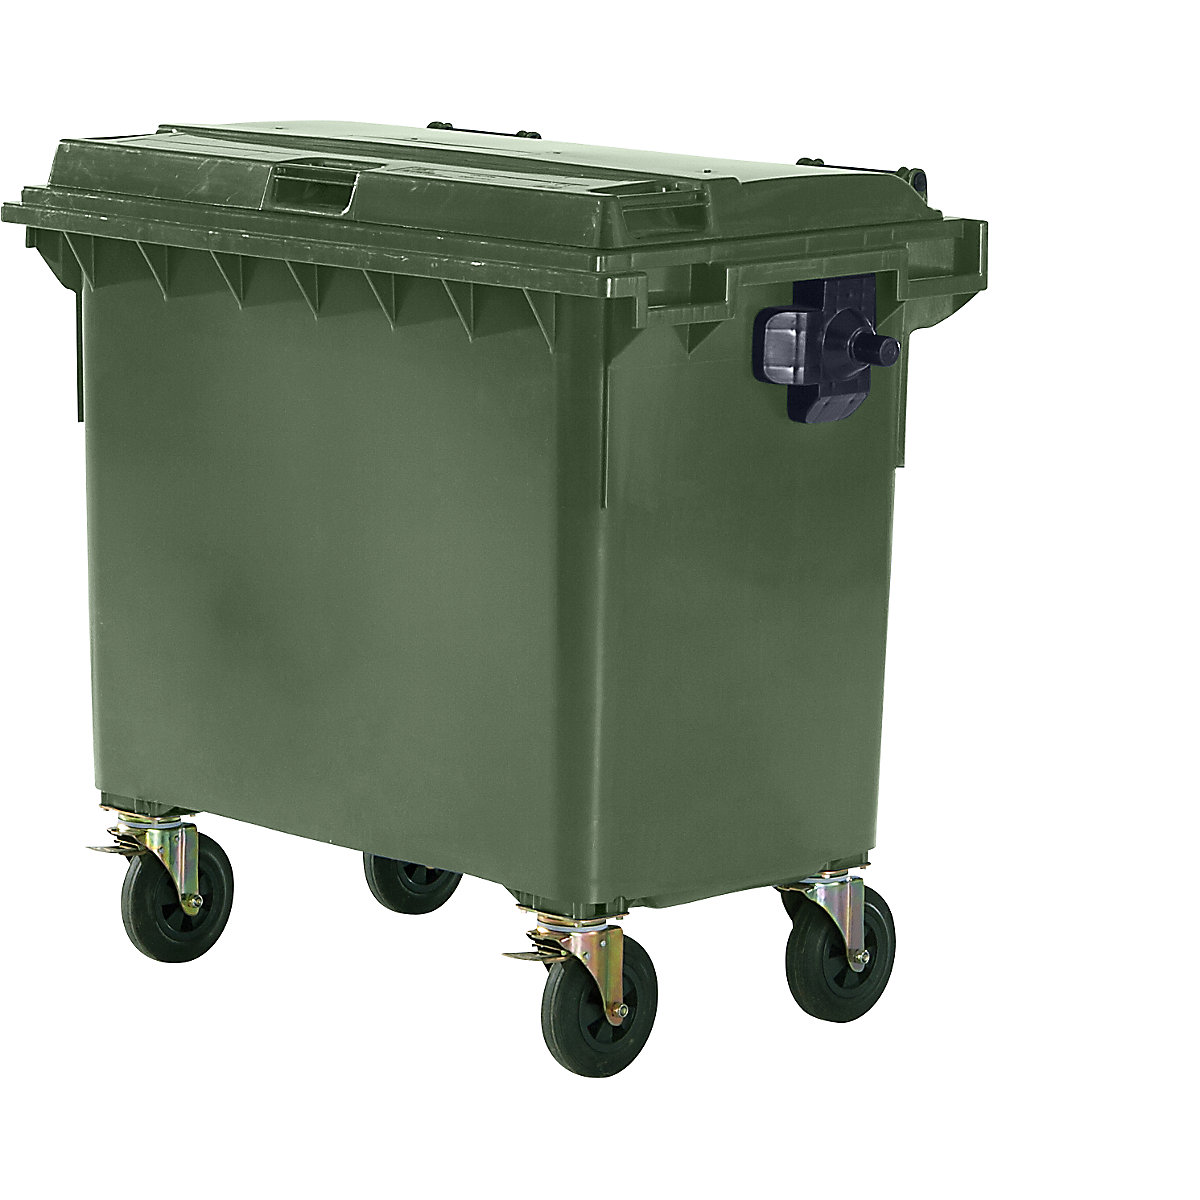 Plastic waste container, DIN EN 840, capacity 660 l, WxHxD 1360 x 1235 x 765 mm, green, from 5+ items-5